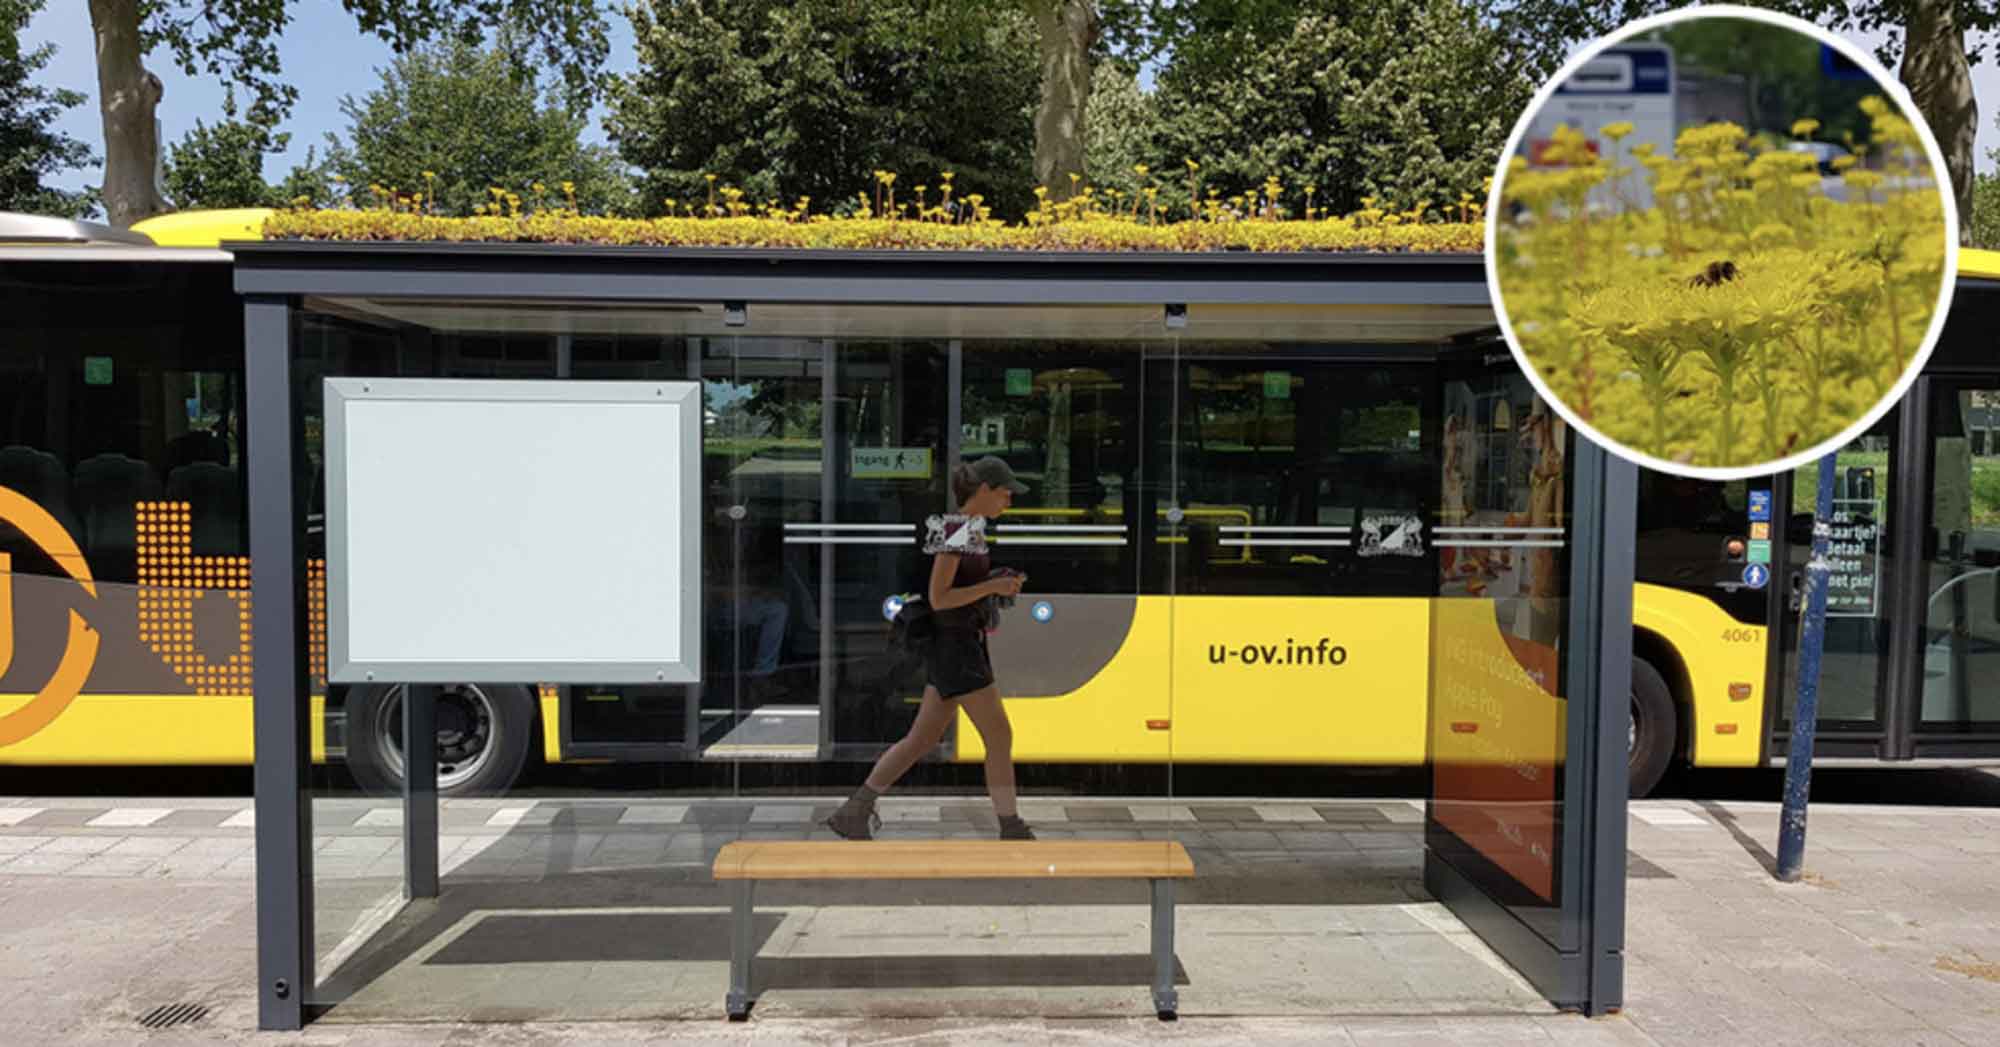 This Dutch City Has Transformed Its Bus Stops Into Bee Stops